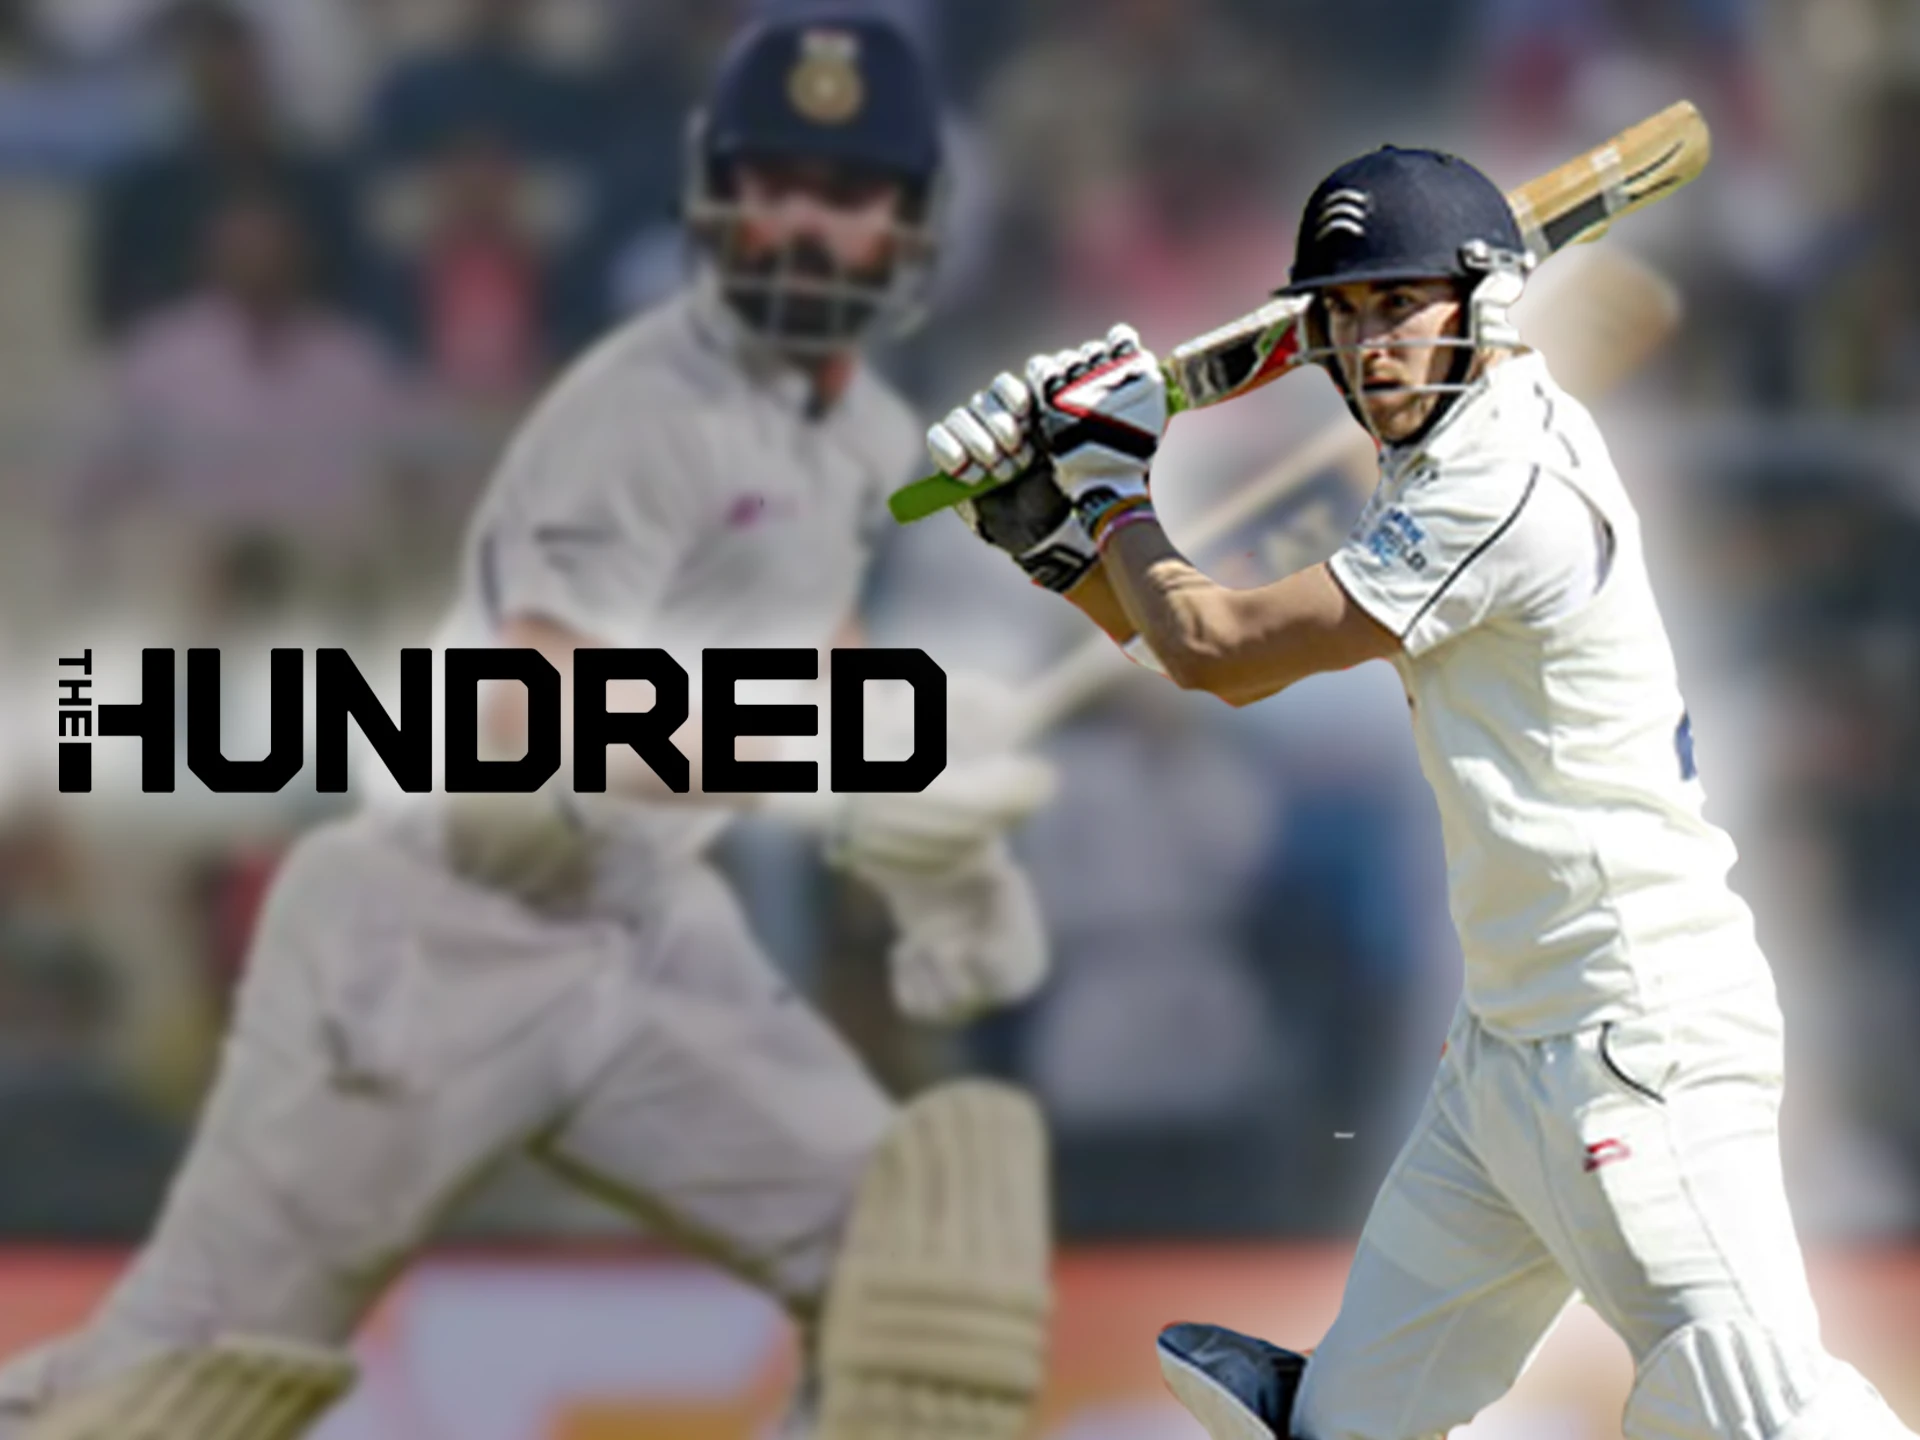 One of the popular cricket tournaments to bet on is The Hundred.